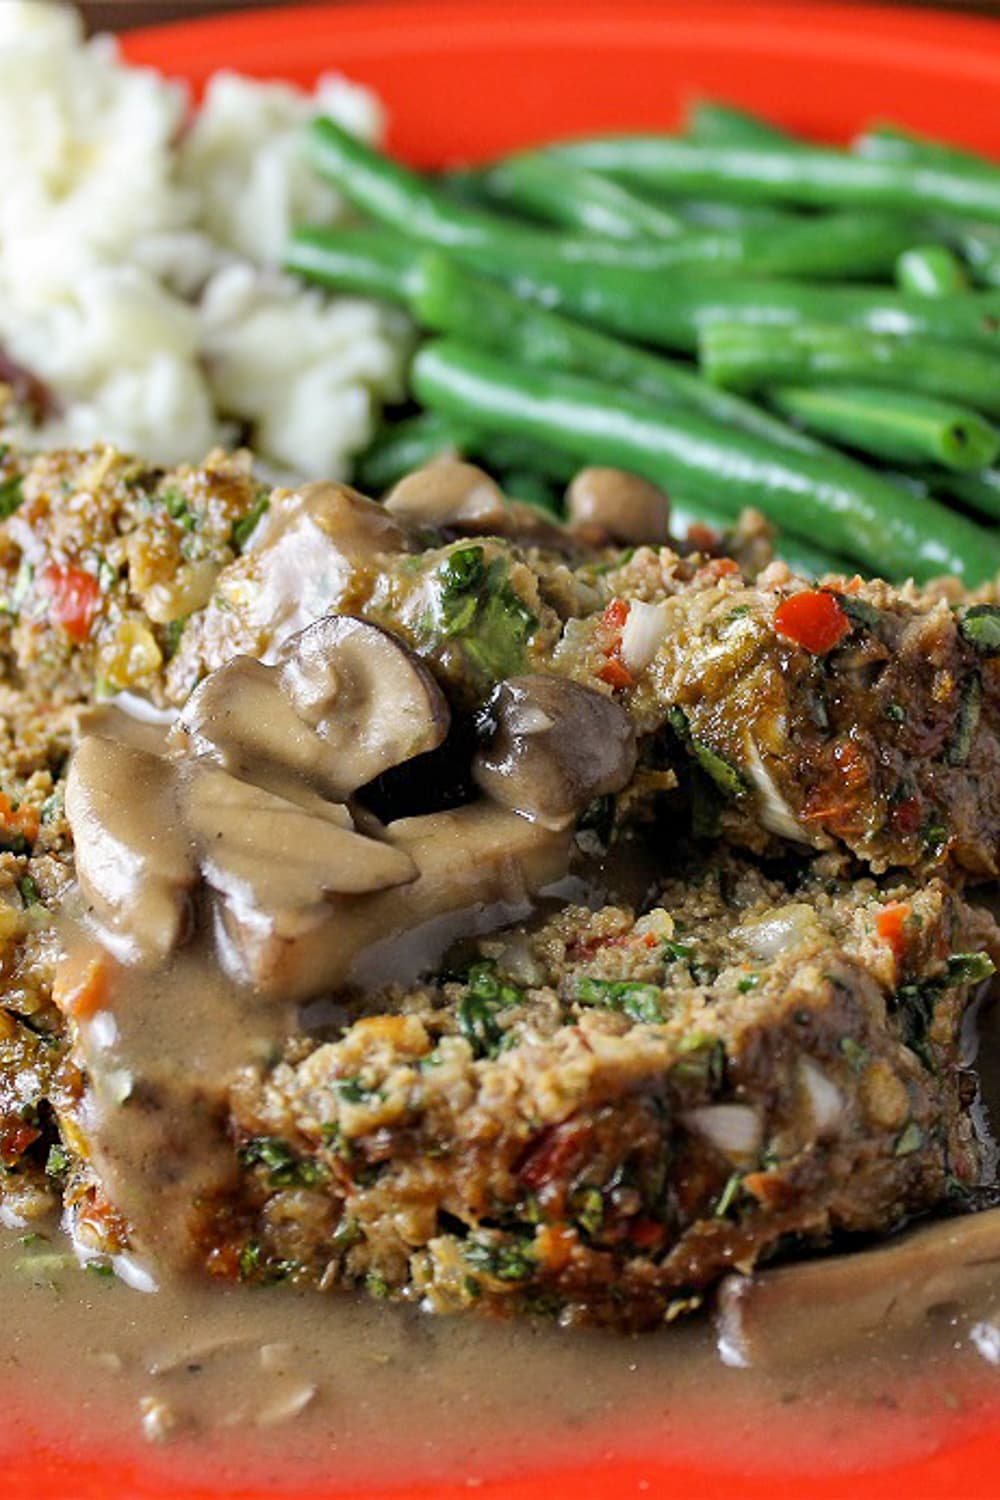 slices of meatloaf with mushroom gravy on plate with veggies p